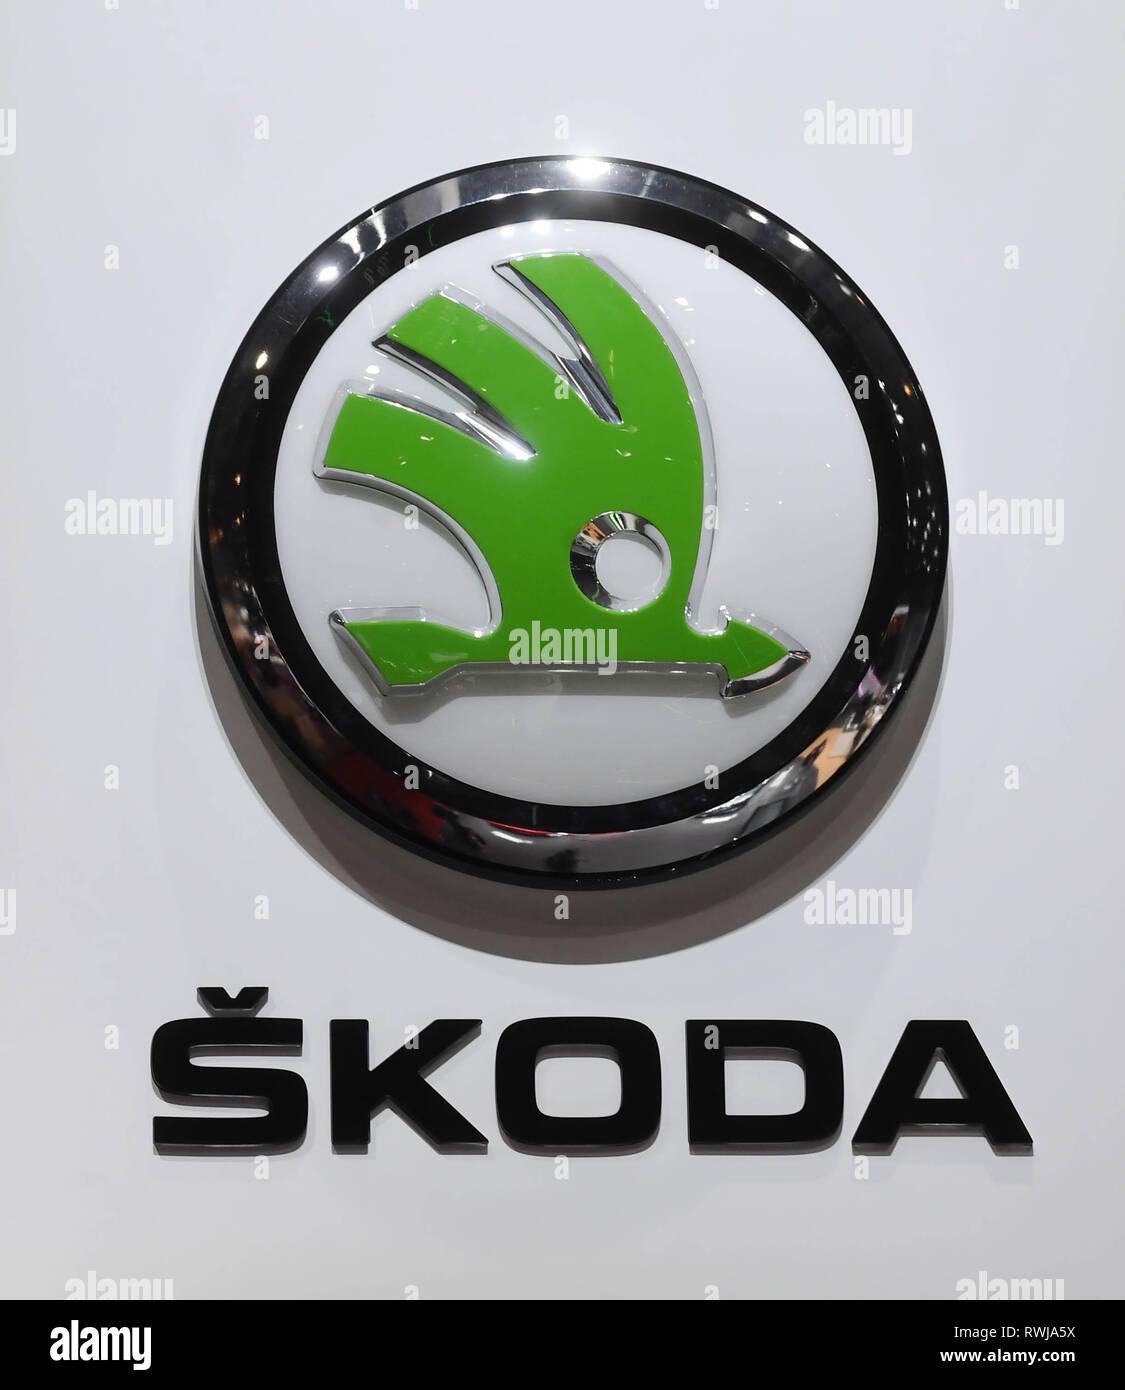 Skoda Logo High Resolution Stock Photography and Images - Alamy